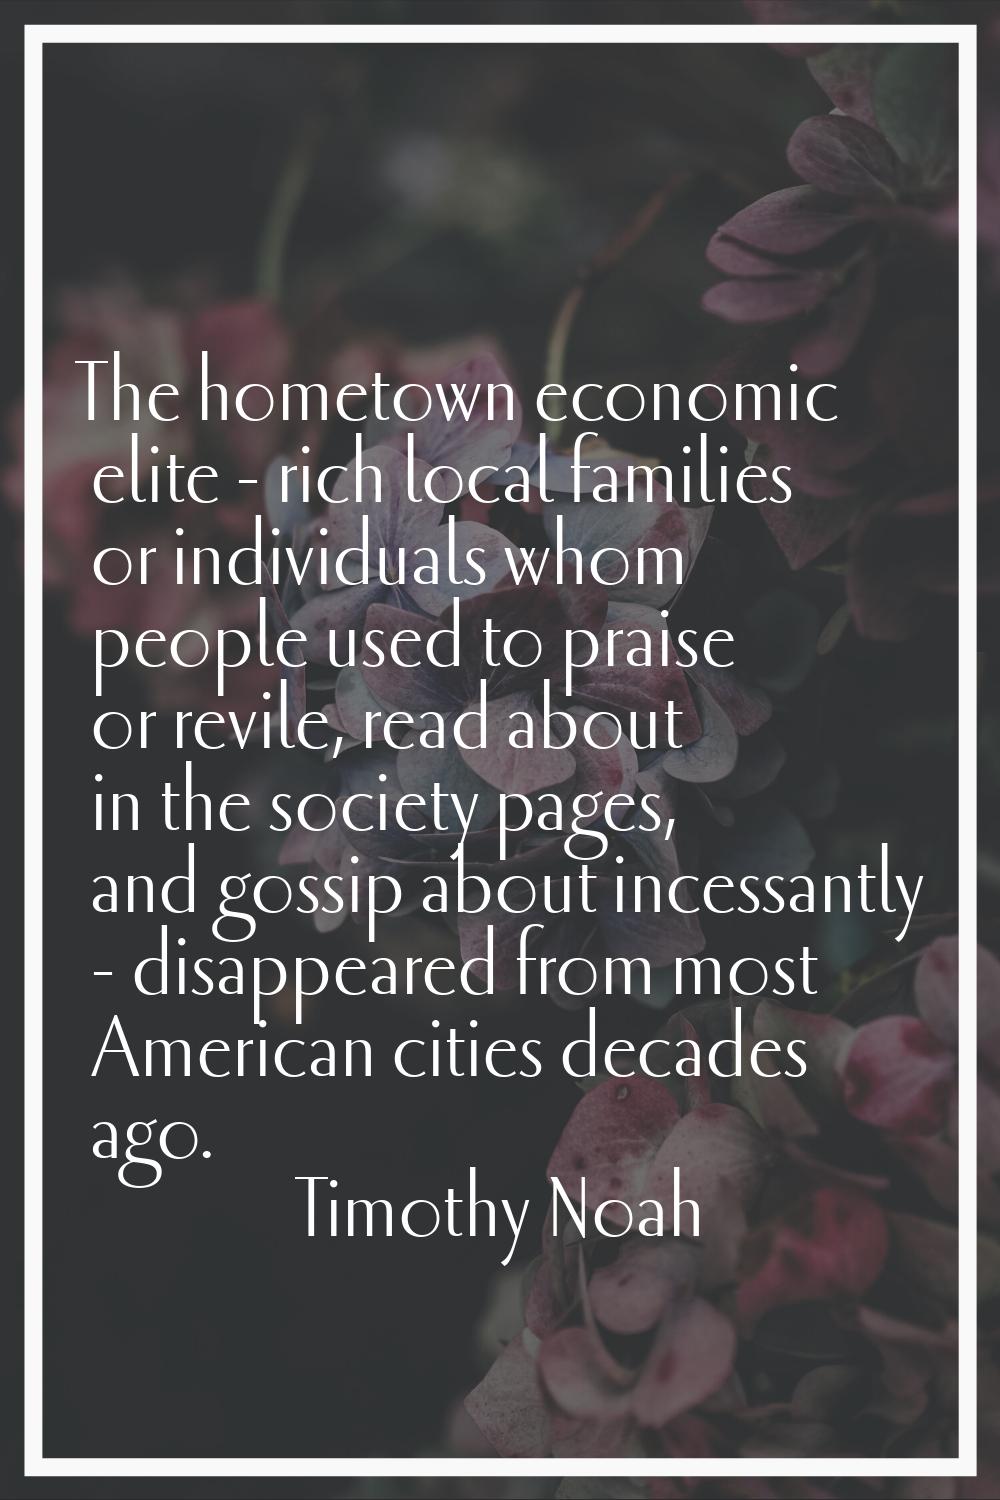 The hometown economic elite - rich local families or individuals whom people used to praise or revi